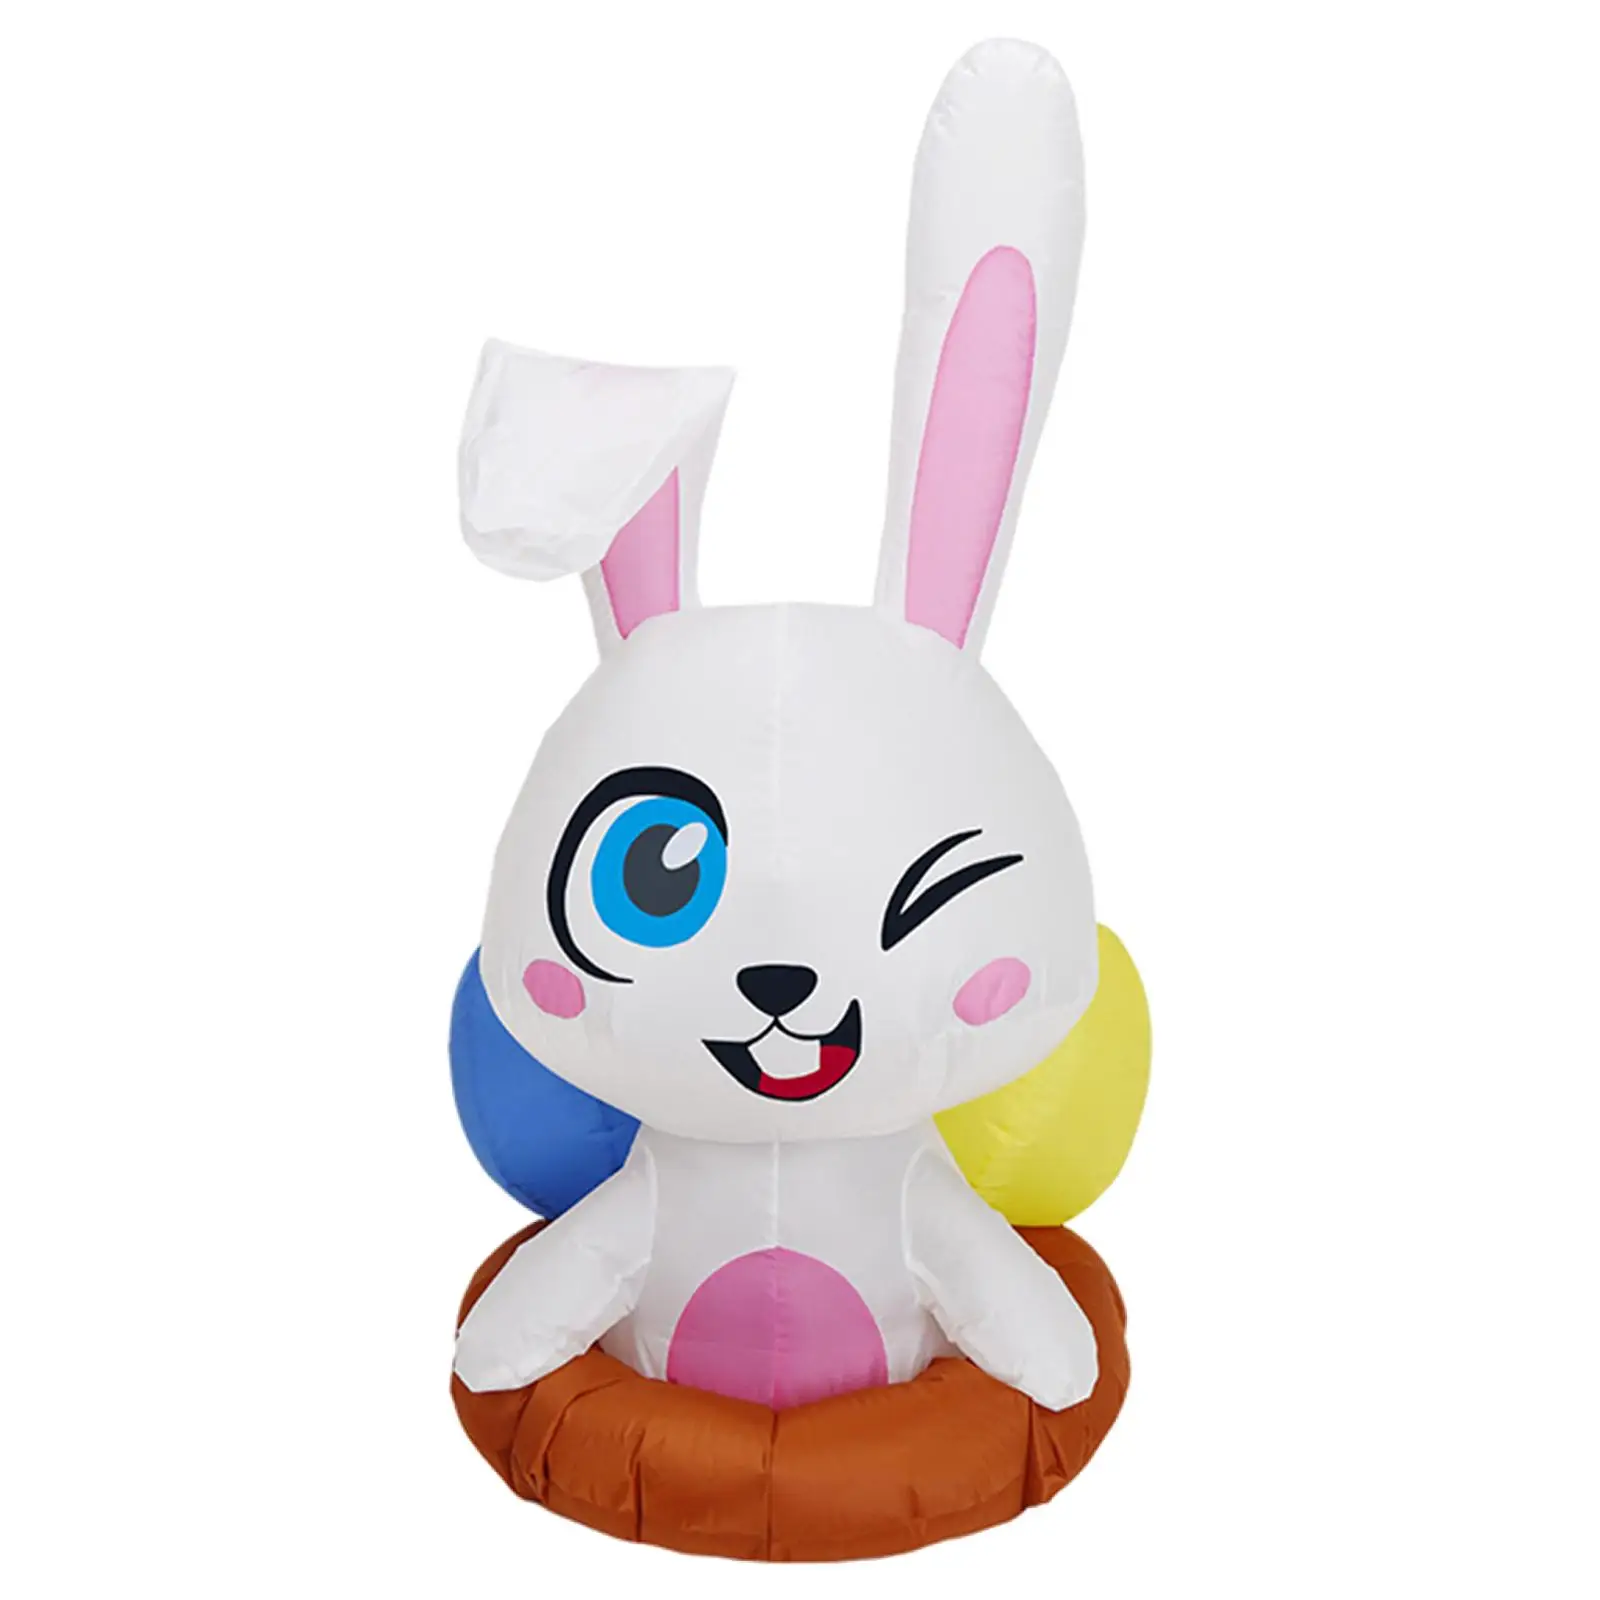 LED Light Easter Inflatable Decoration Rabbit Ornament for Home Lawn Yard Decoration